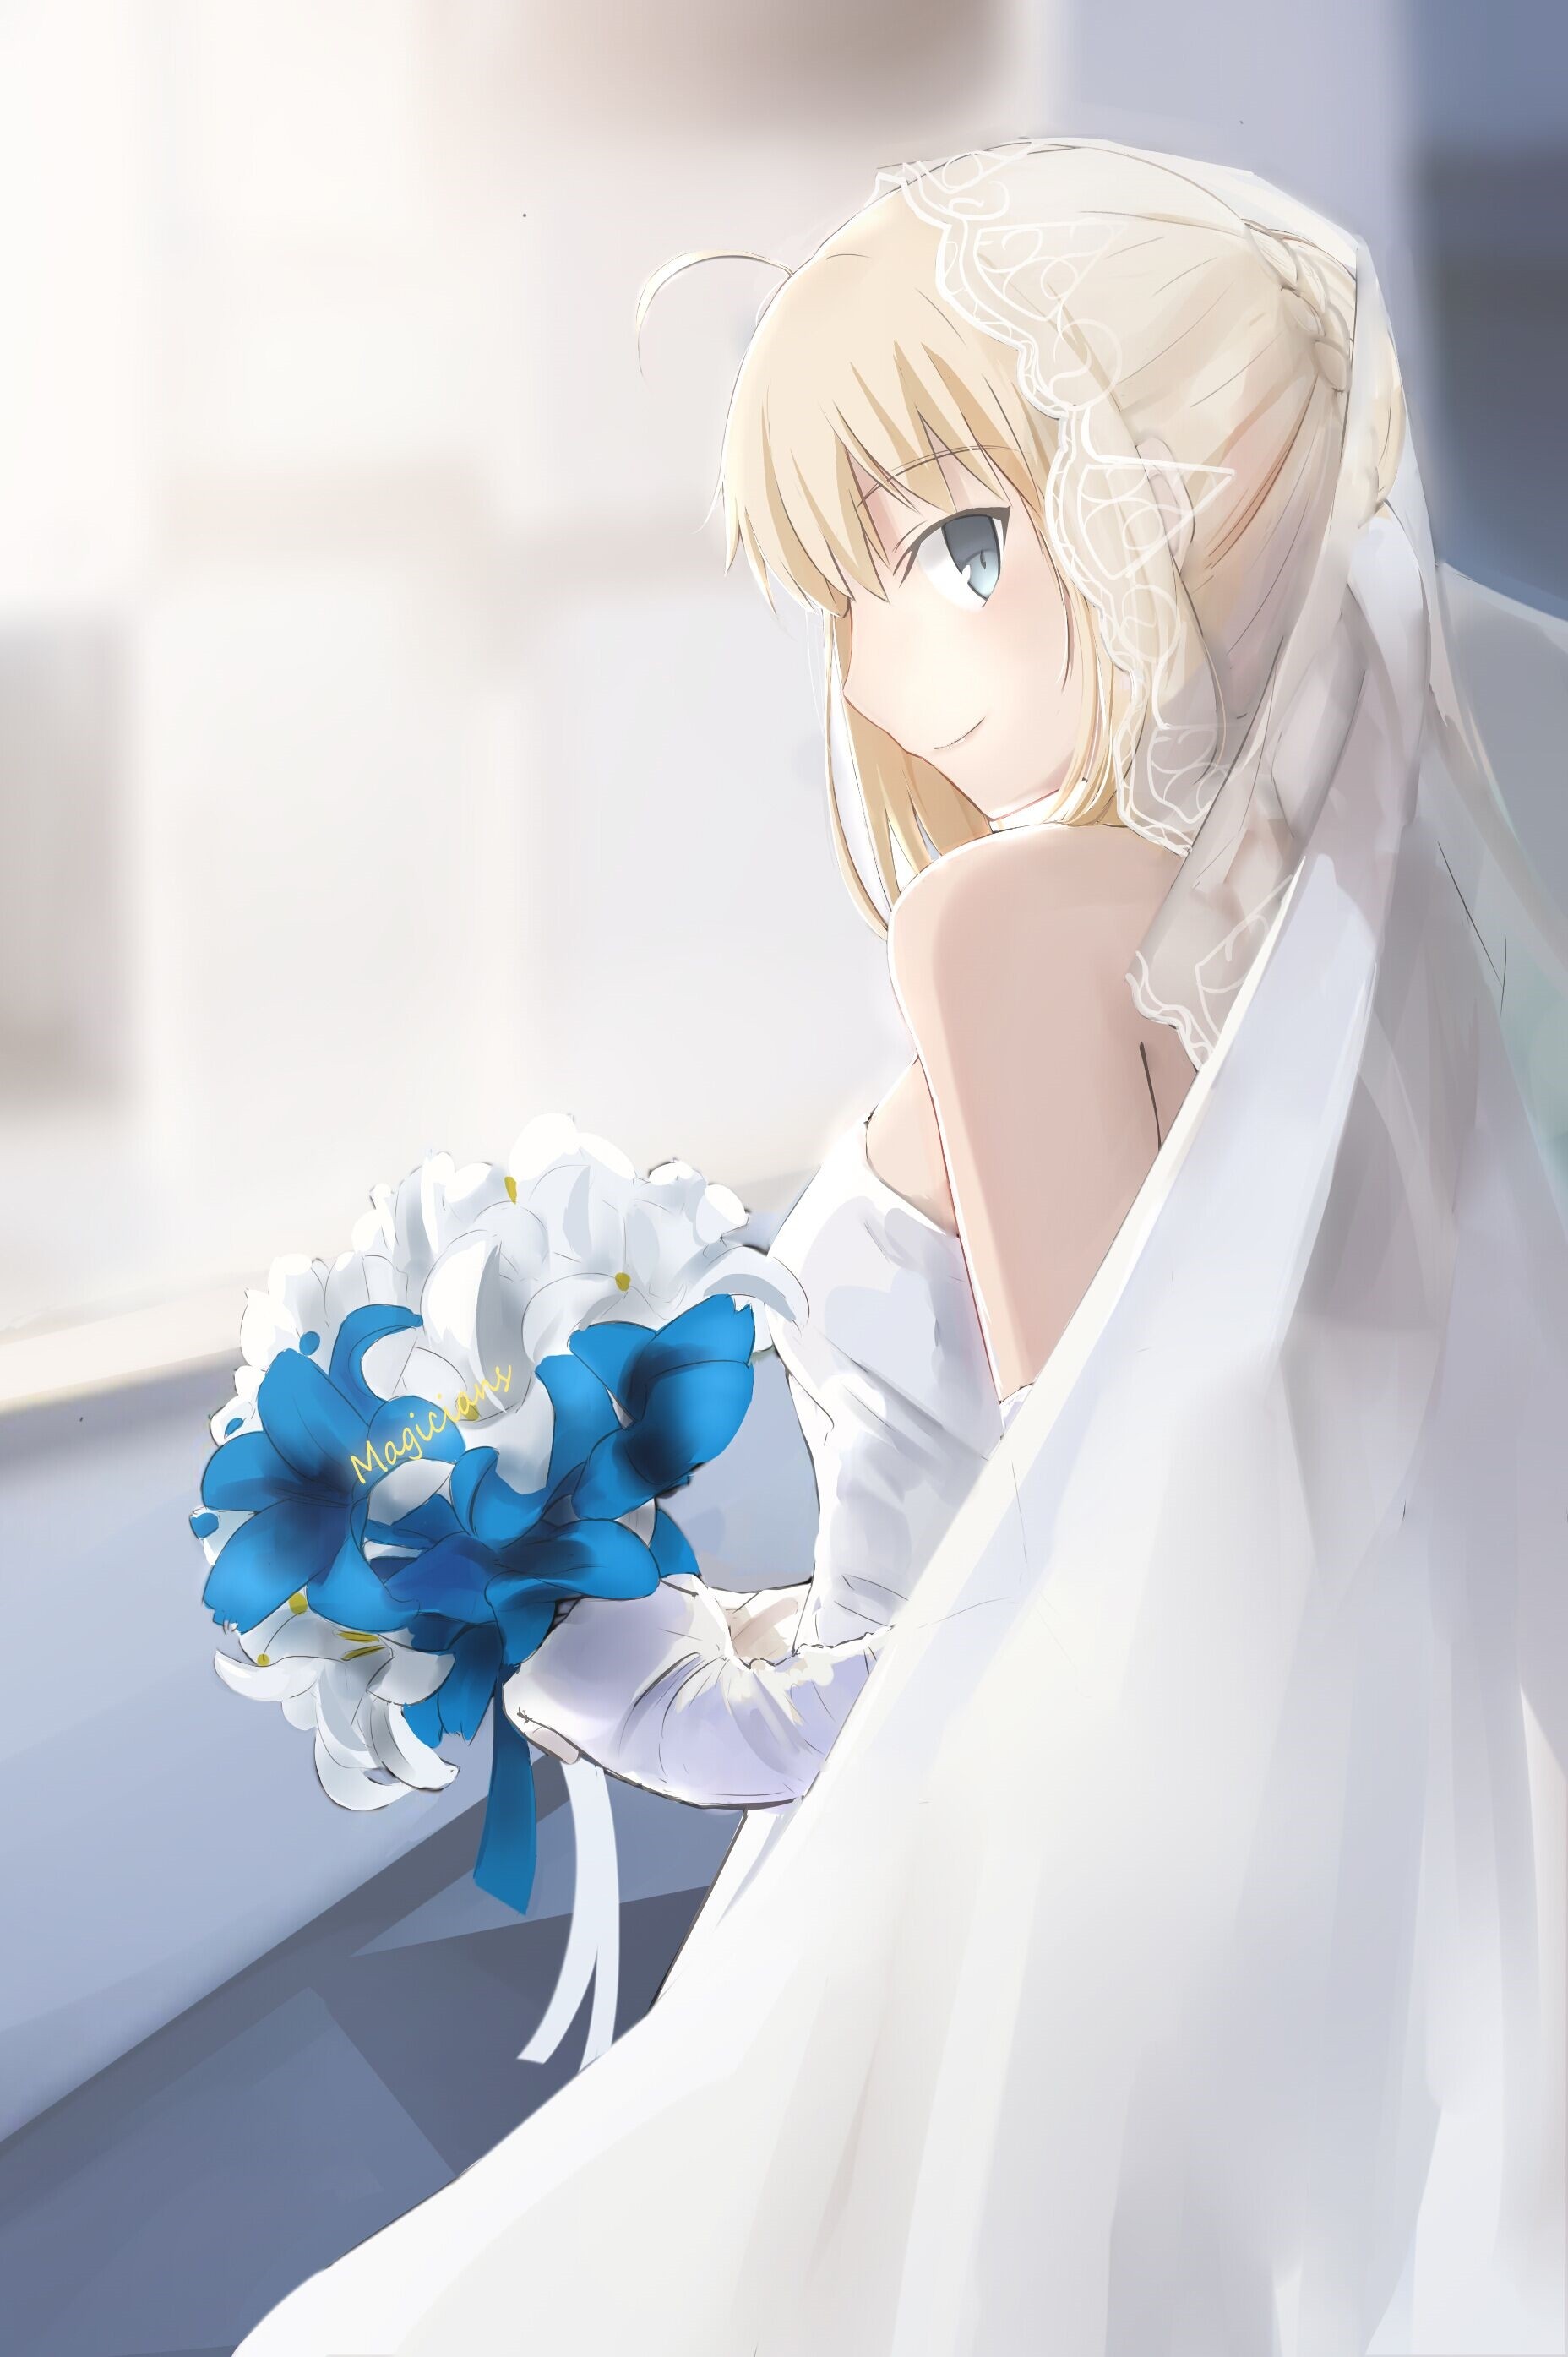 Anime 1856x2790 Fate series Fate/Stay Night anime girls wedding dress small boobs blushing rear view smiling alternate costume bridal veil elbow gloves blue eyes sideboob Saber Artoria Pendragon looking at viewer bare shoulders braids hairbun ahoge 2D blurred bouquets strapless dress Magicians fan art anime blonde